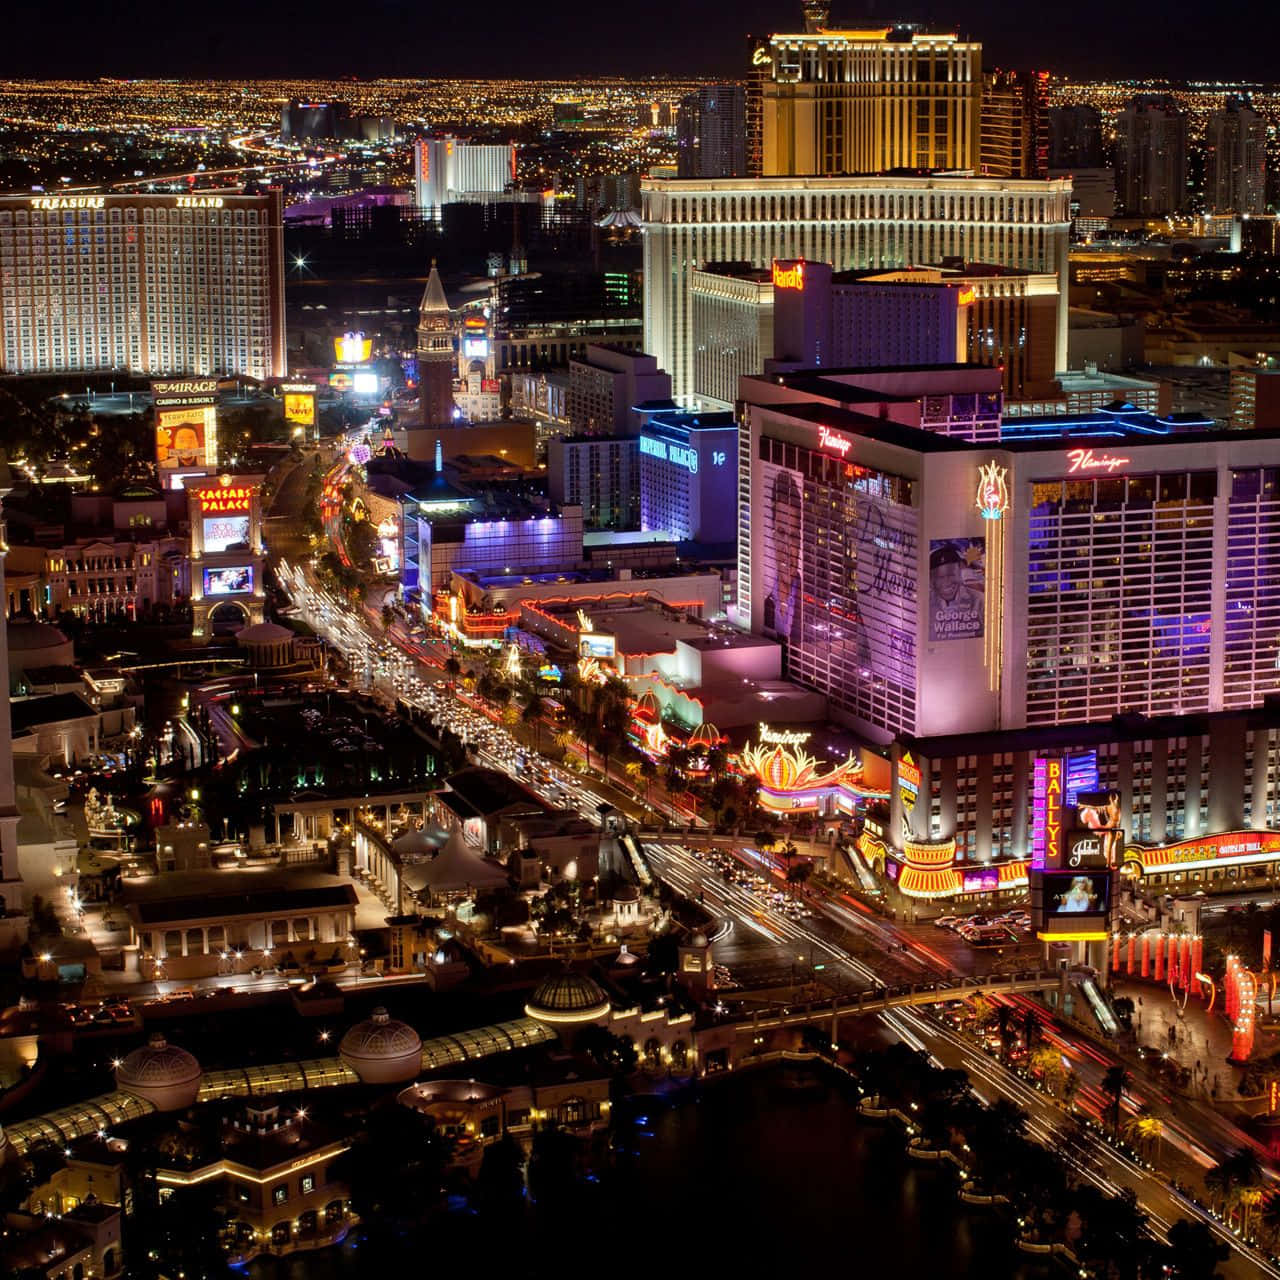 Enjoy the vibrant nightlife of Las Vegas from the comfort of your phone. Wallpaper